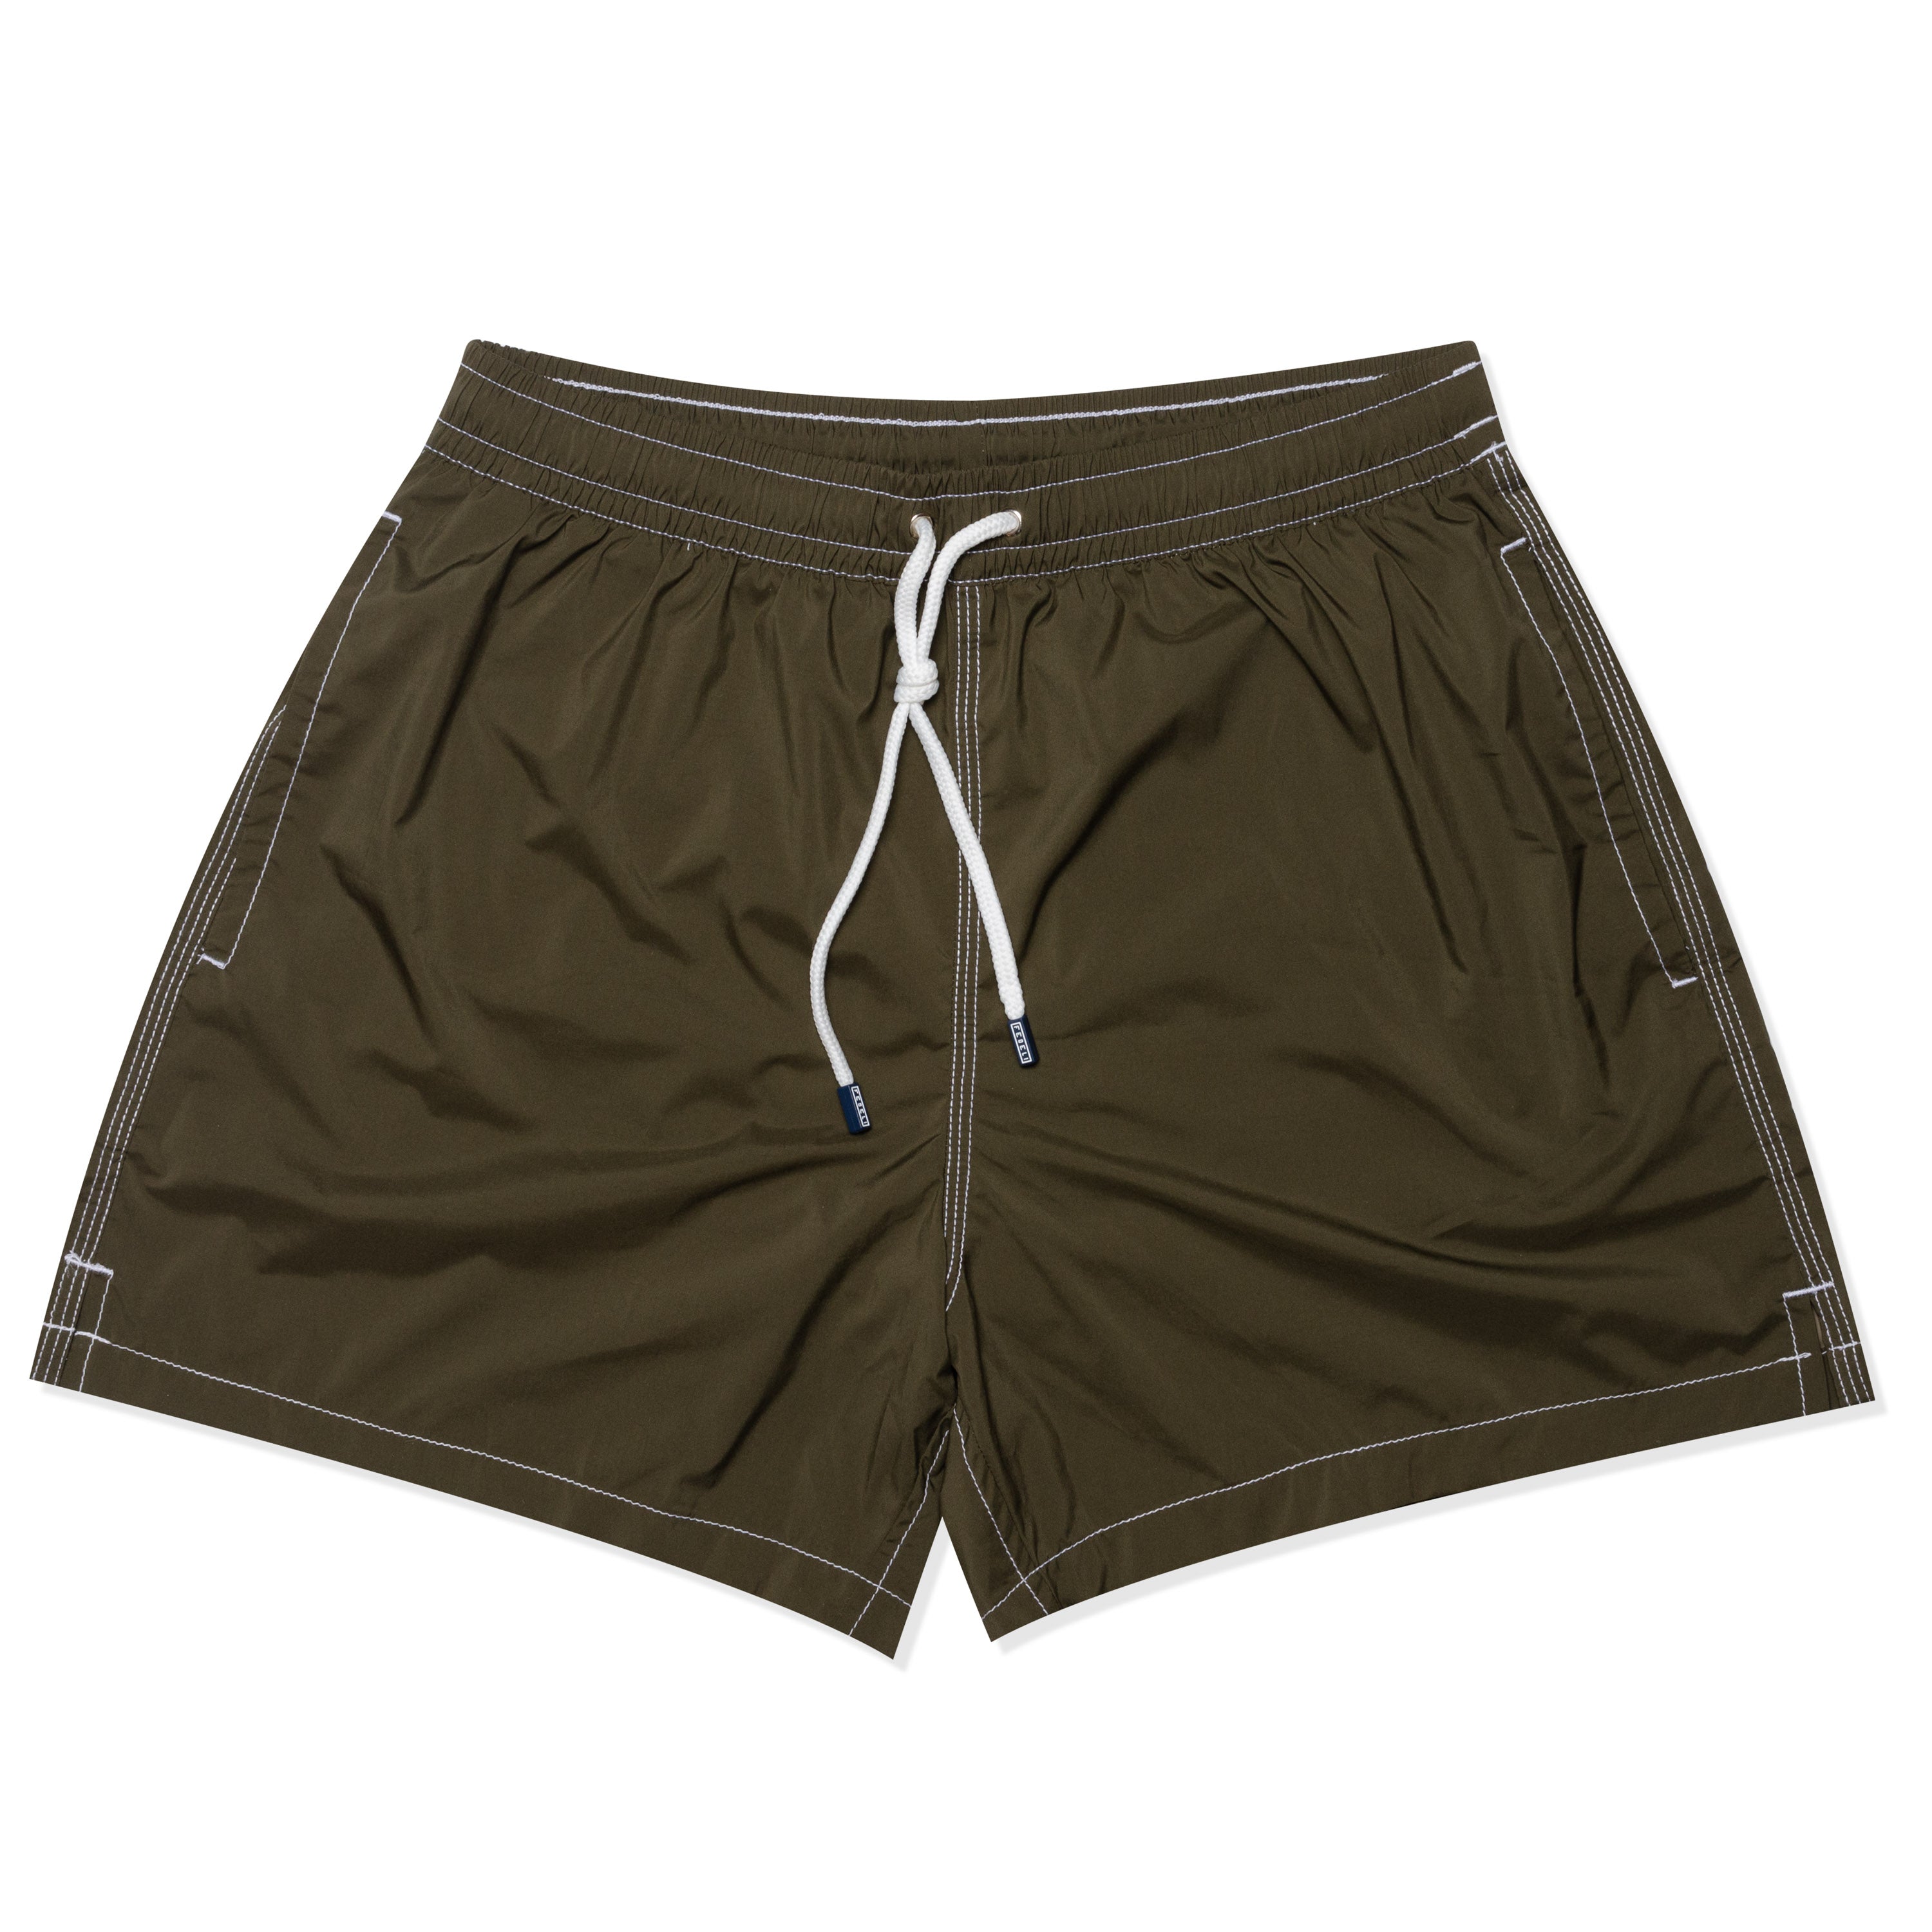 FEDELI Army Green Madeira Airstop Swim Shorts Trunks NEW 3XL